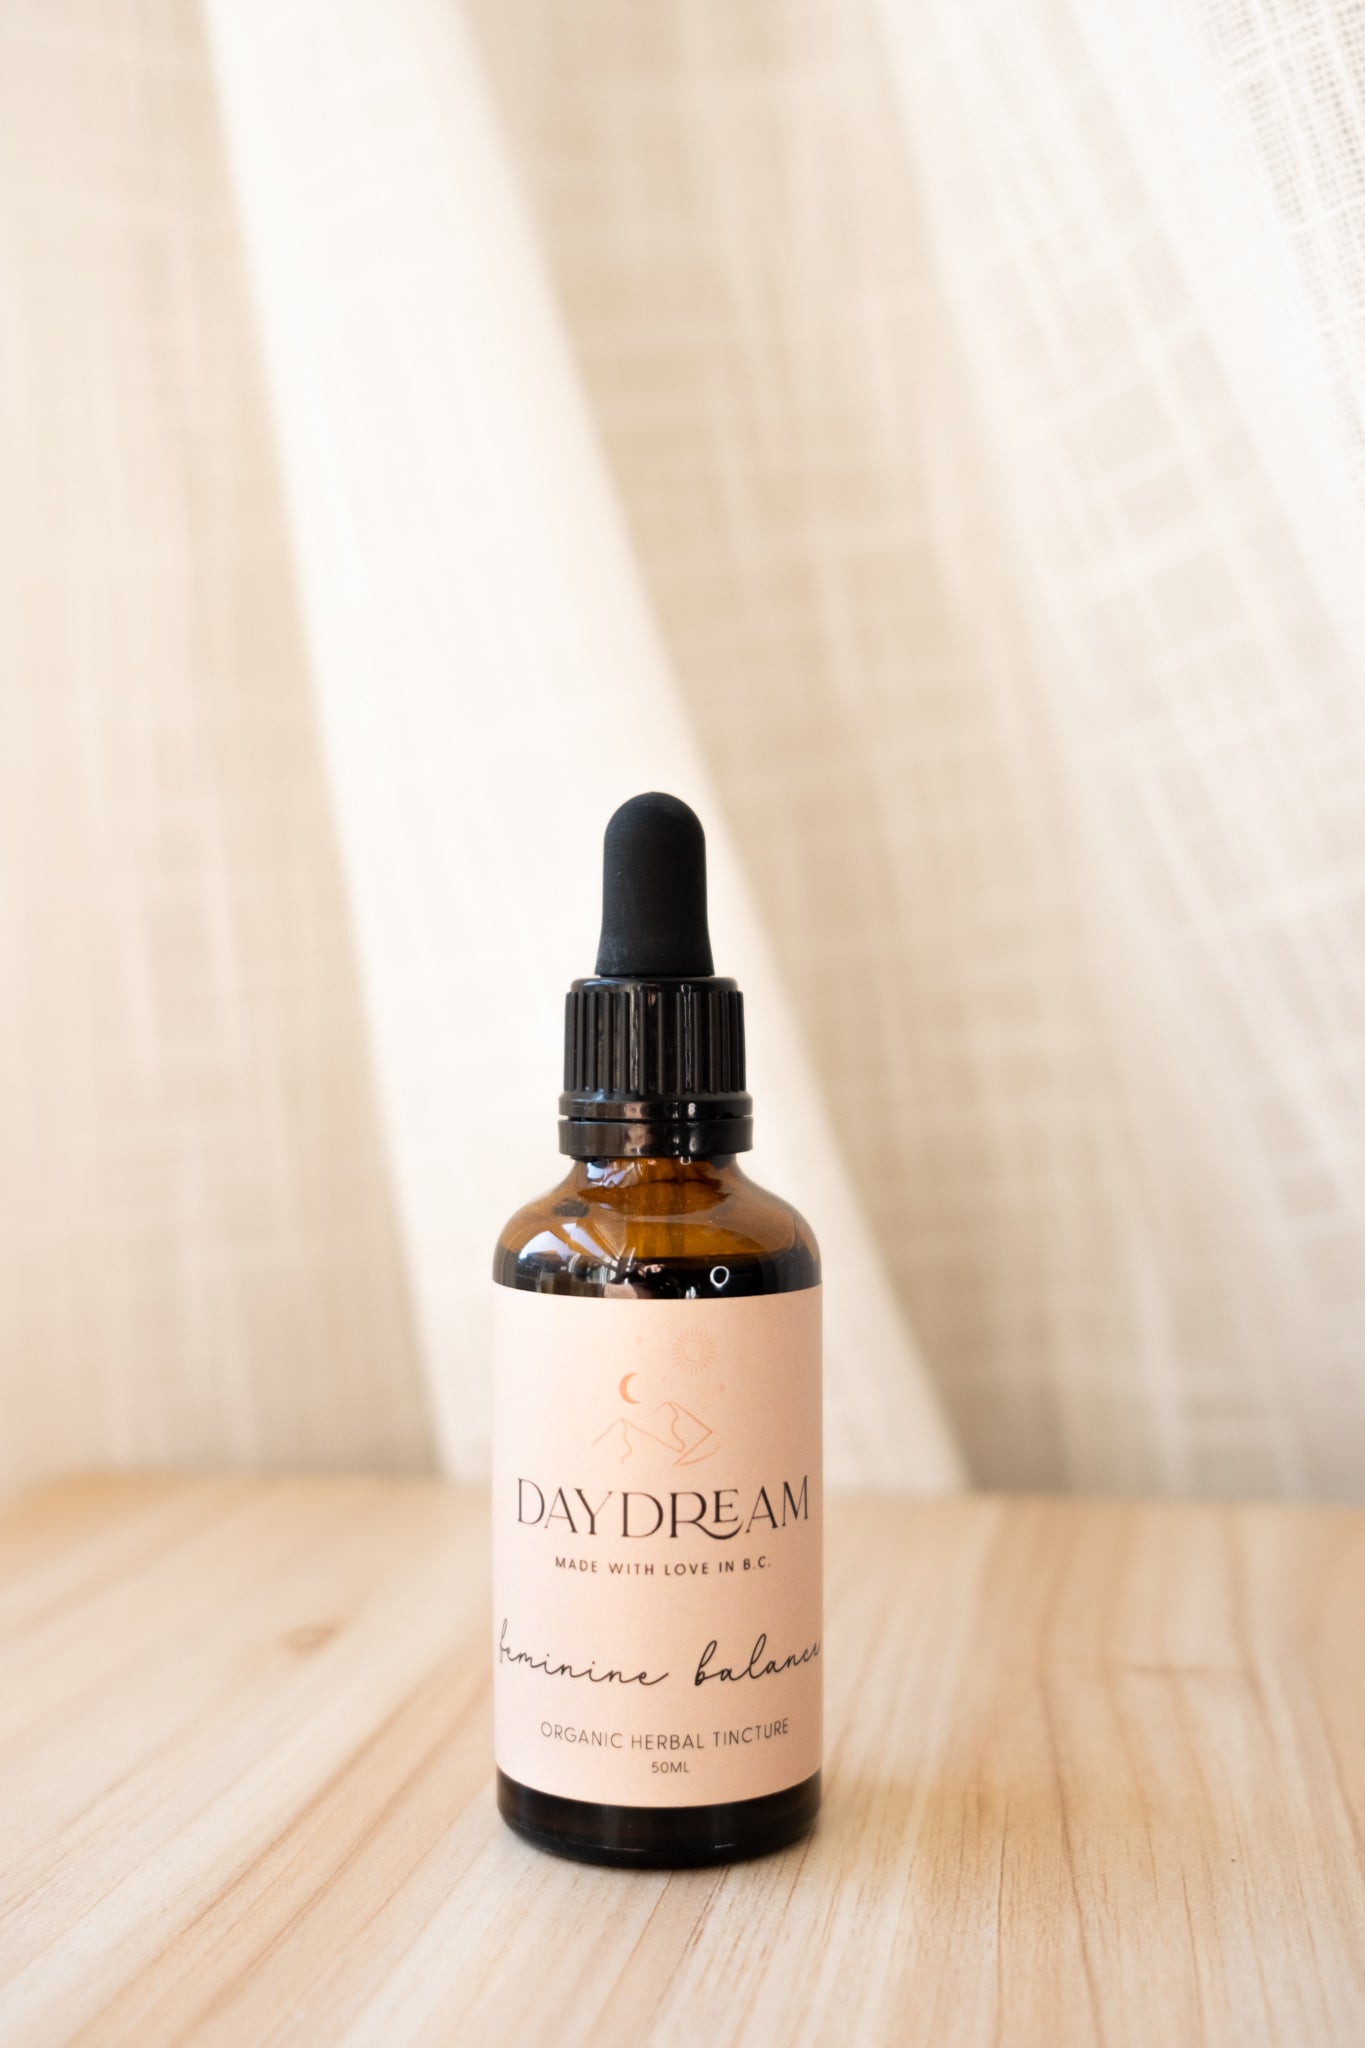 Our Feminine Balance herbal tincture has been crafted from a variety of different herbs known for their ability to balance and harmonize feminine hormones, offering women a natural remedy to ease menstrual discomfort and symptoms of hormone imbalance.